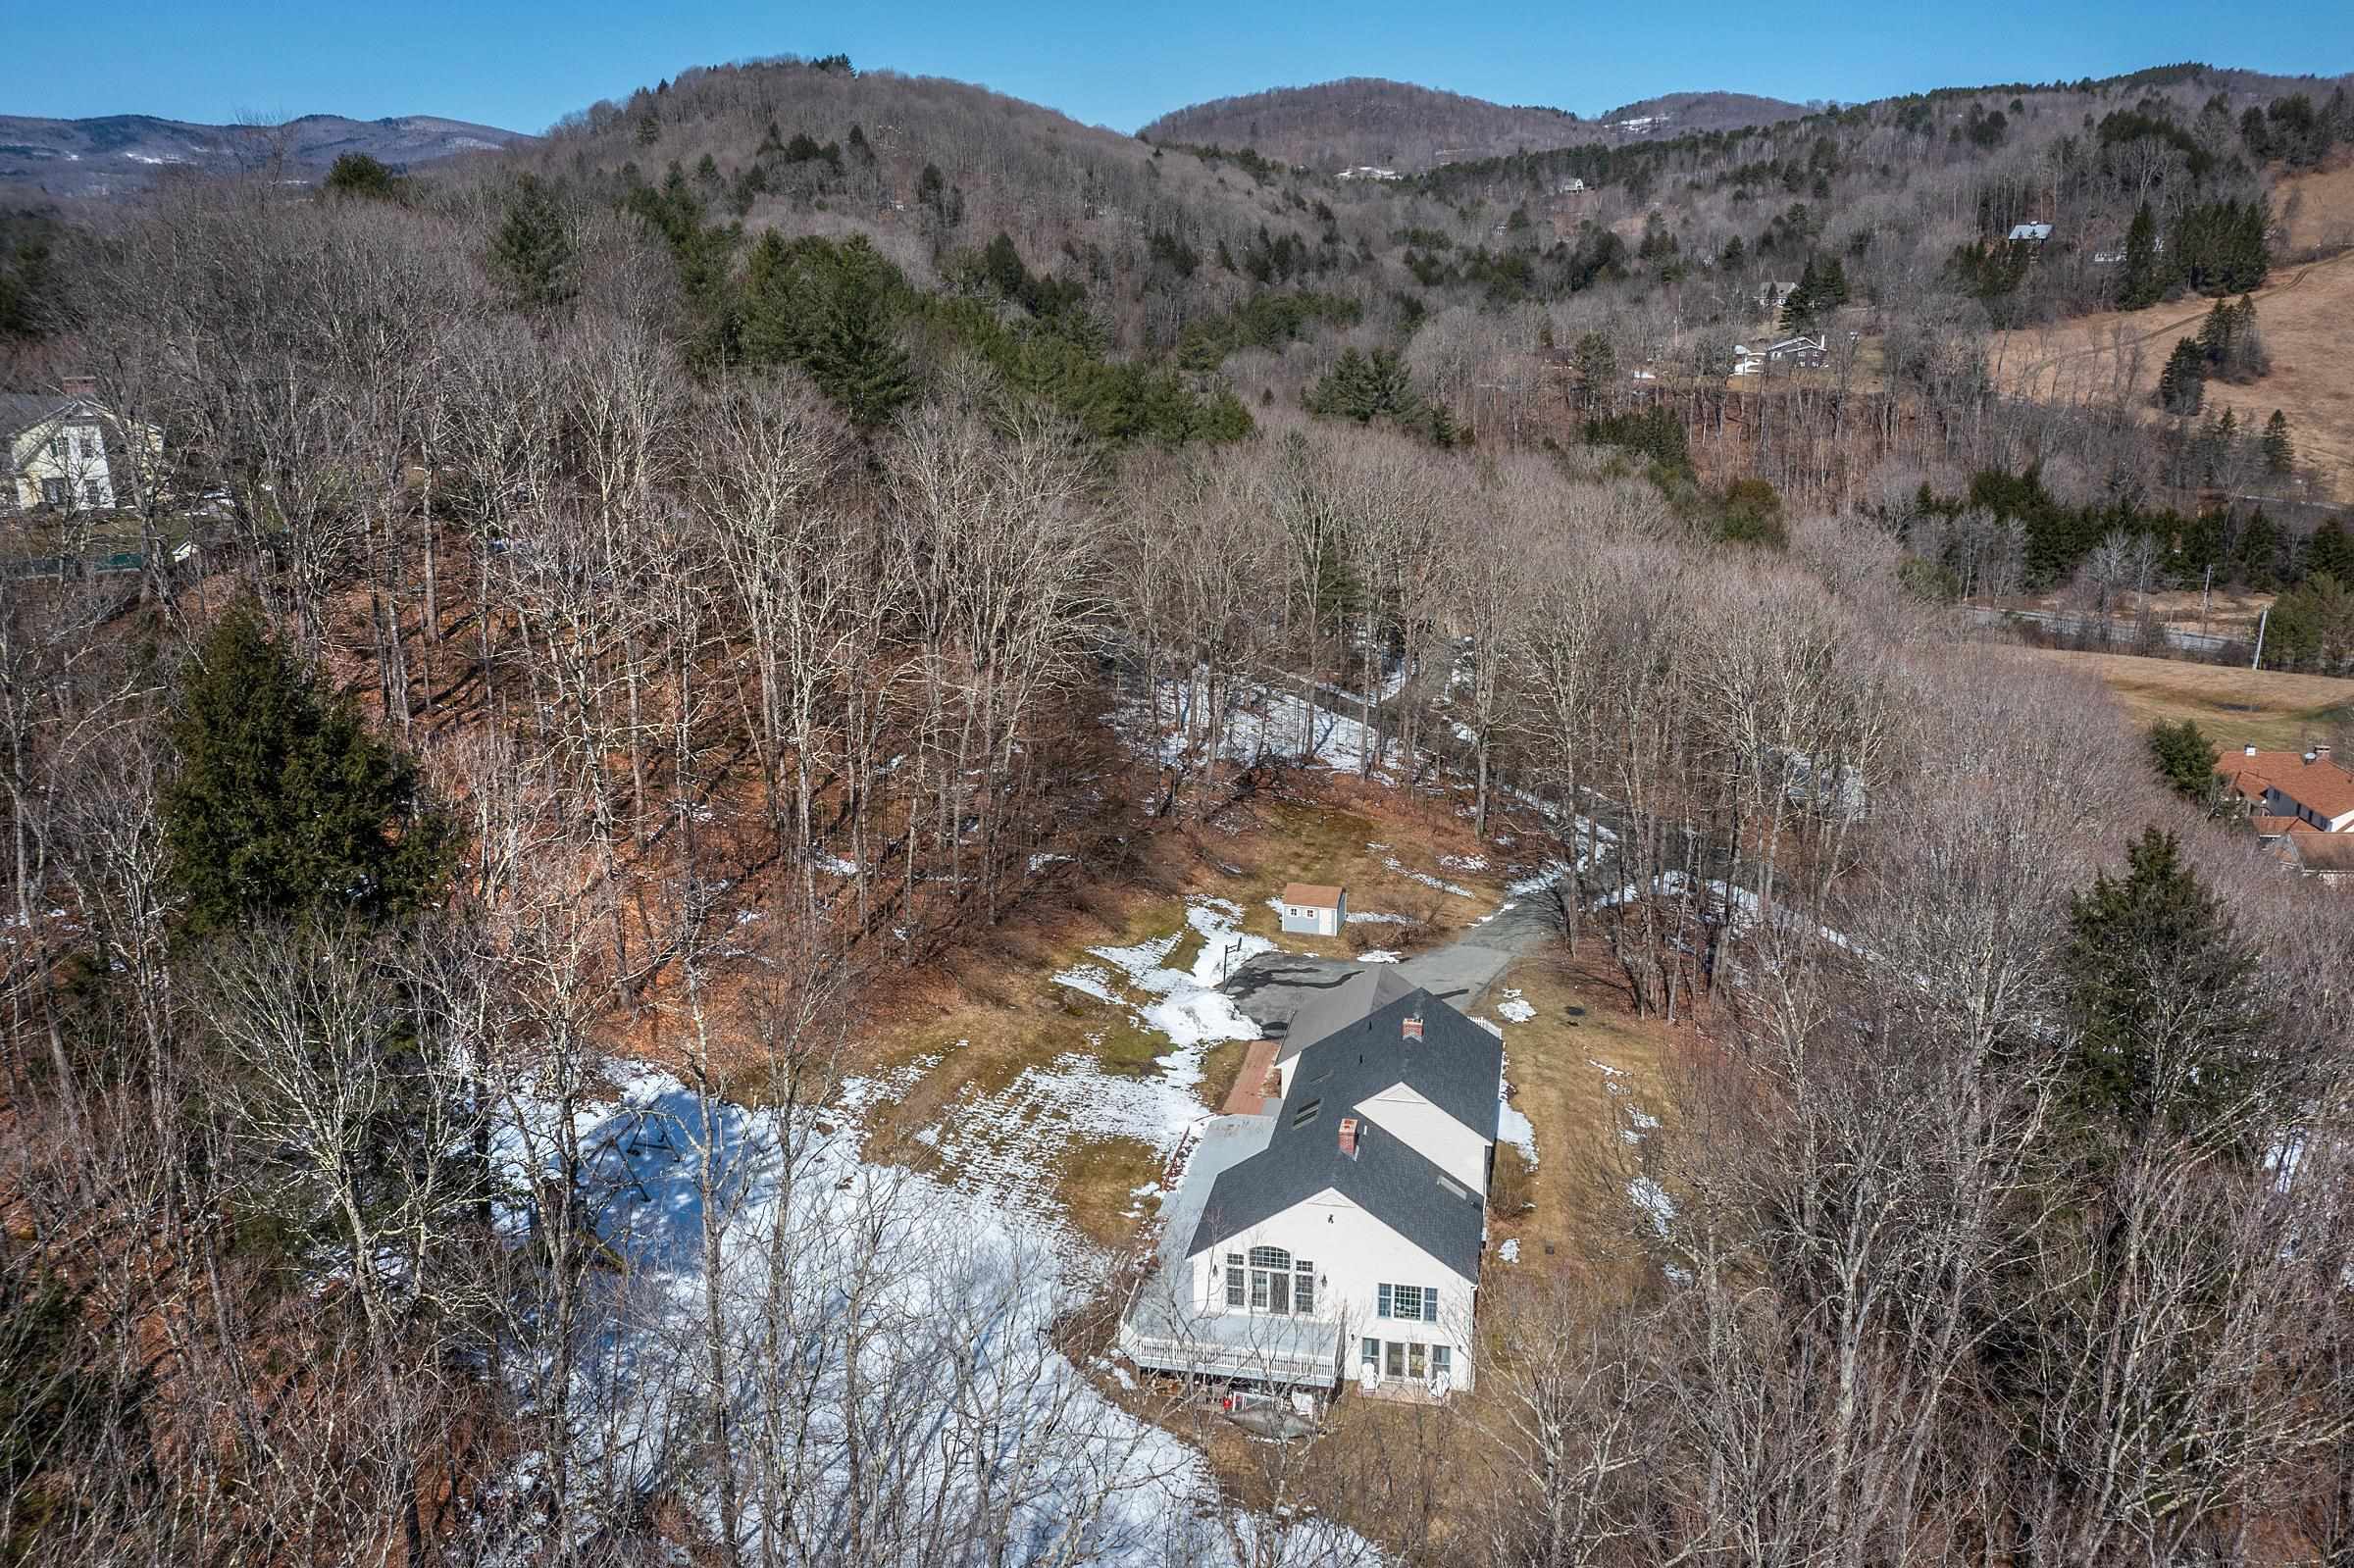 An aerial view of the property